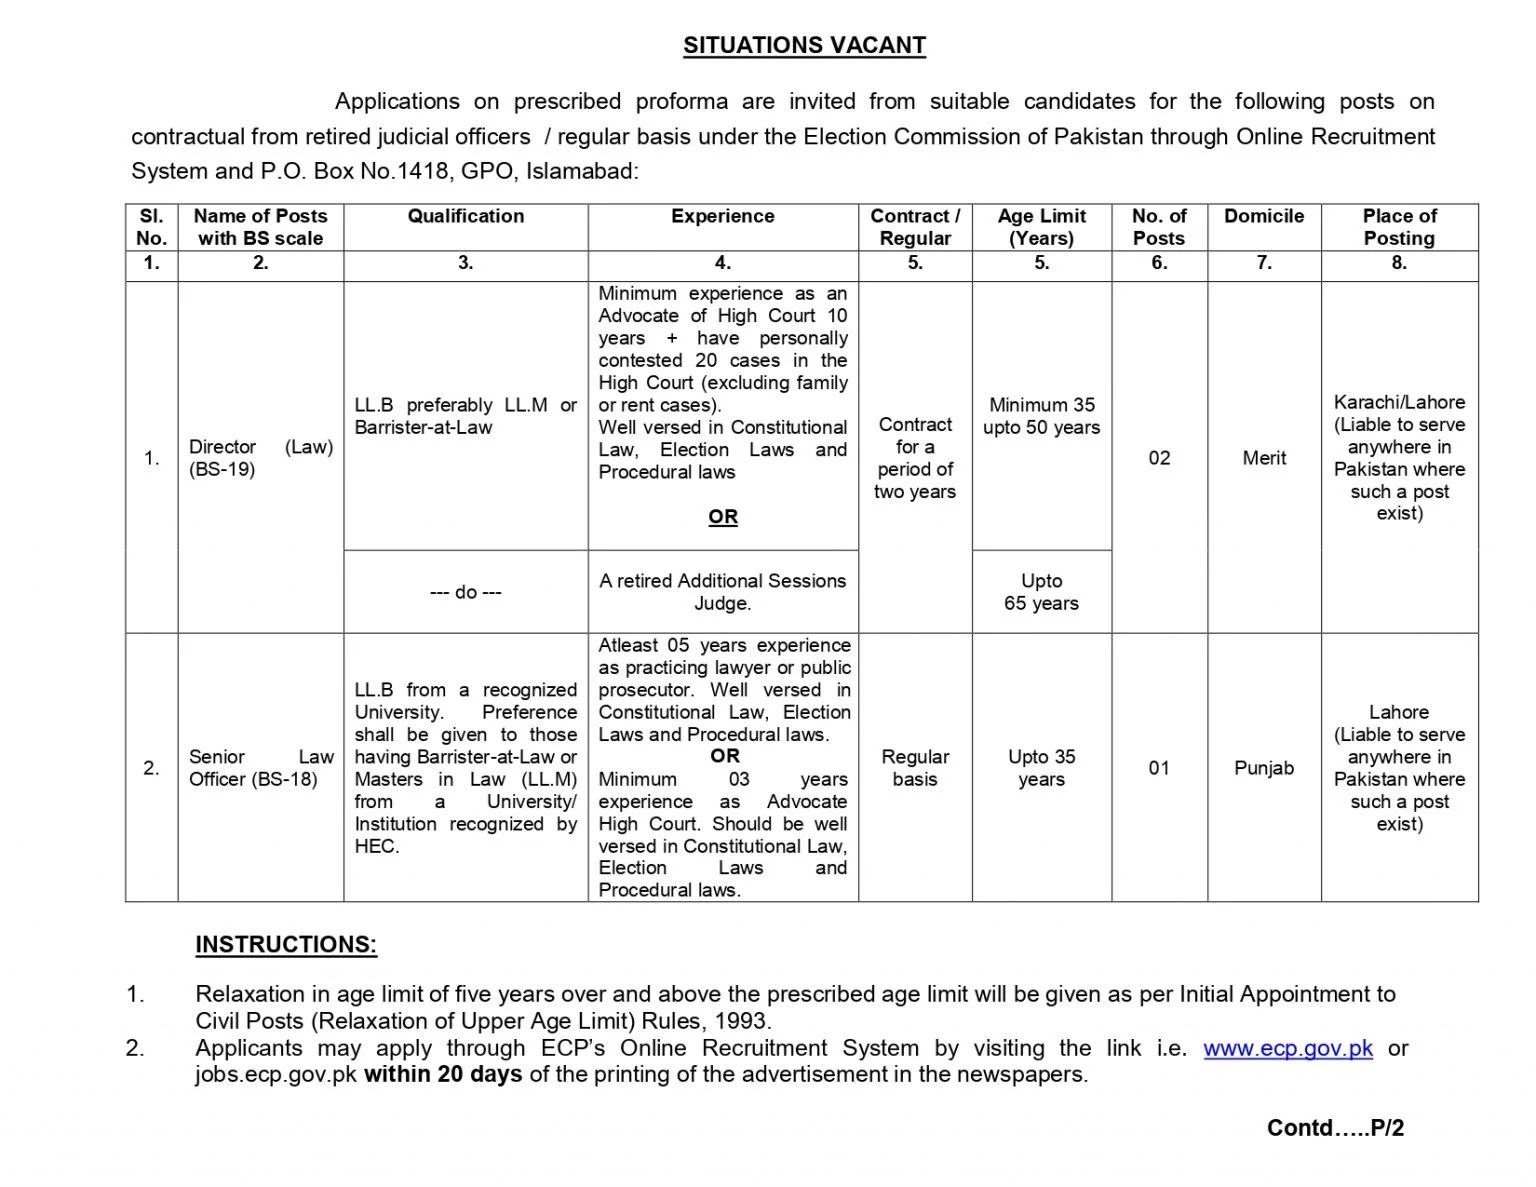 Election Commission of Pakistan ECP Jobs for Director, Senior Law Officer, etc. in July 2022 | Apply Online